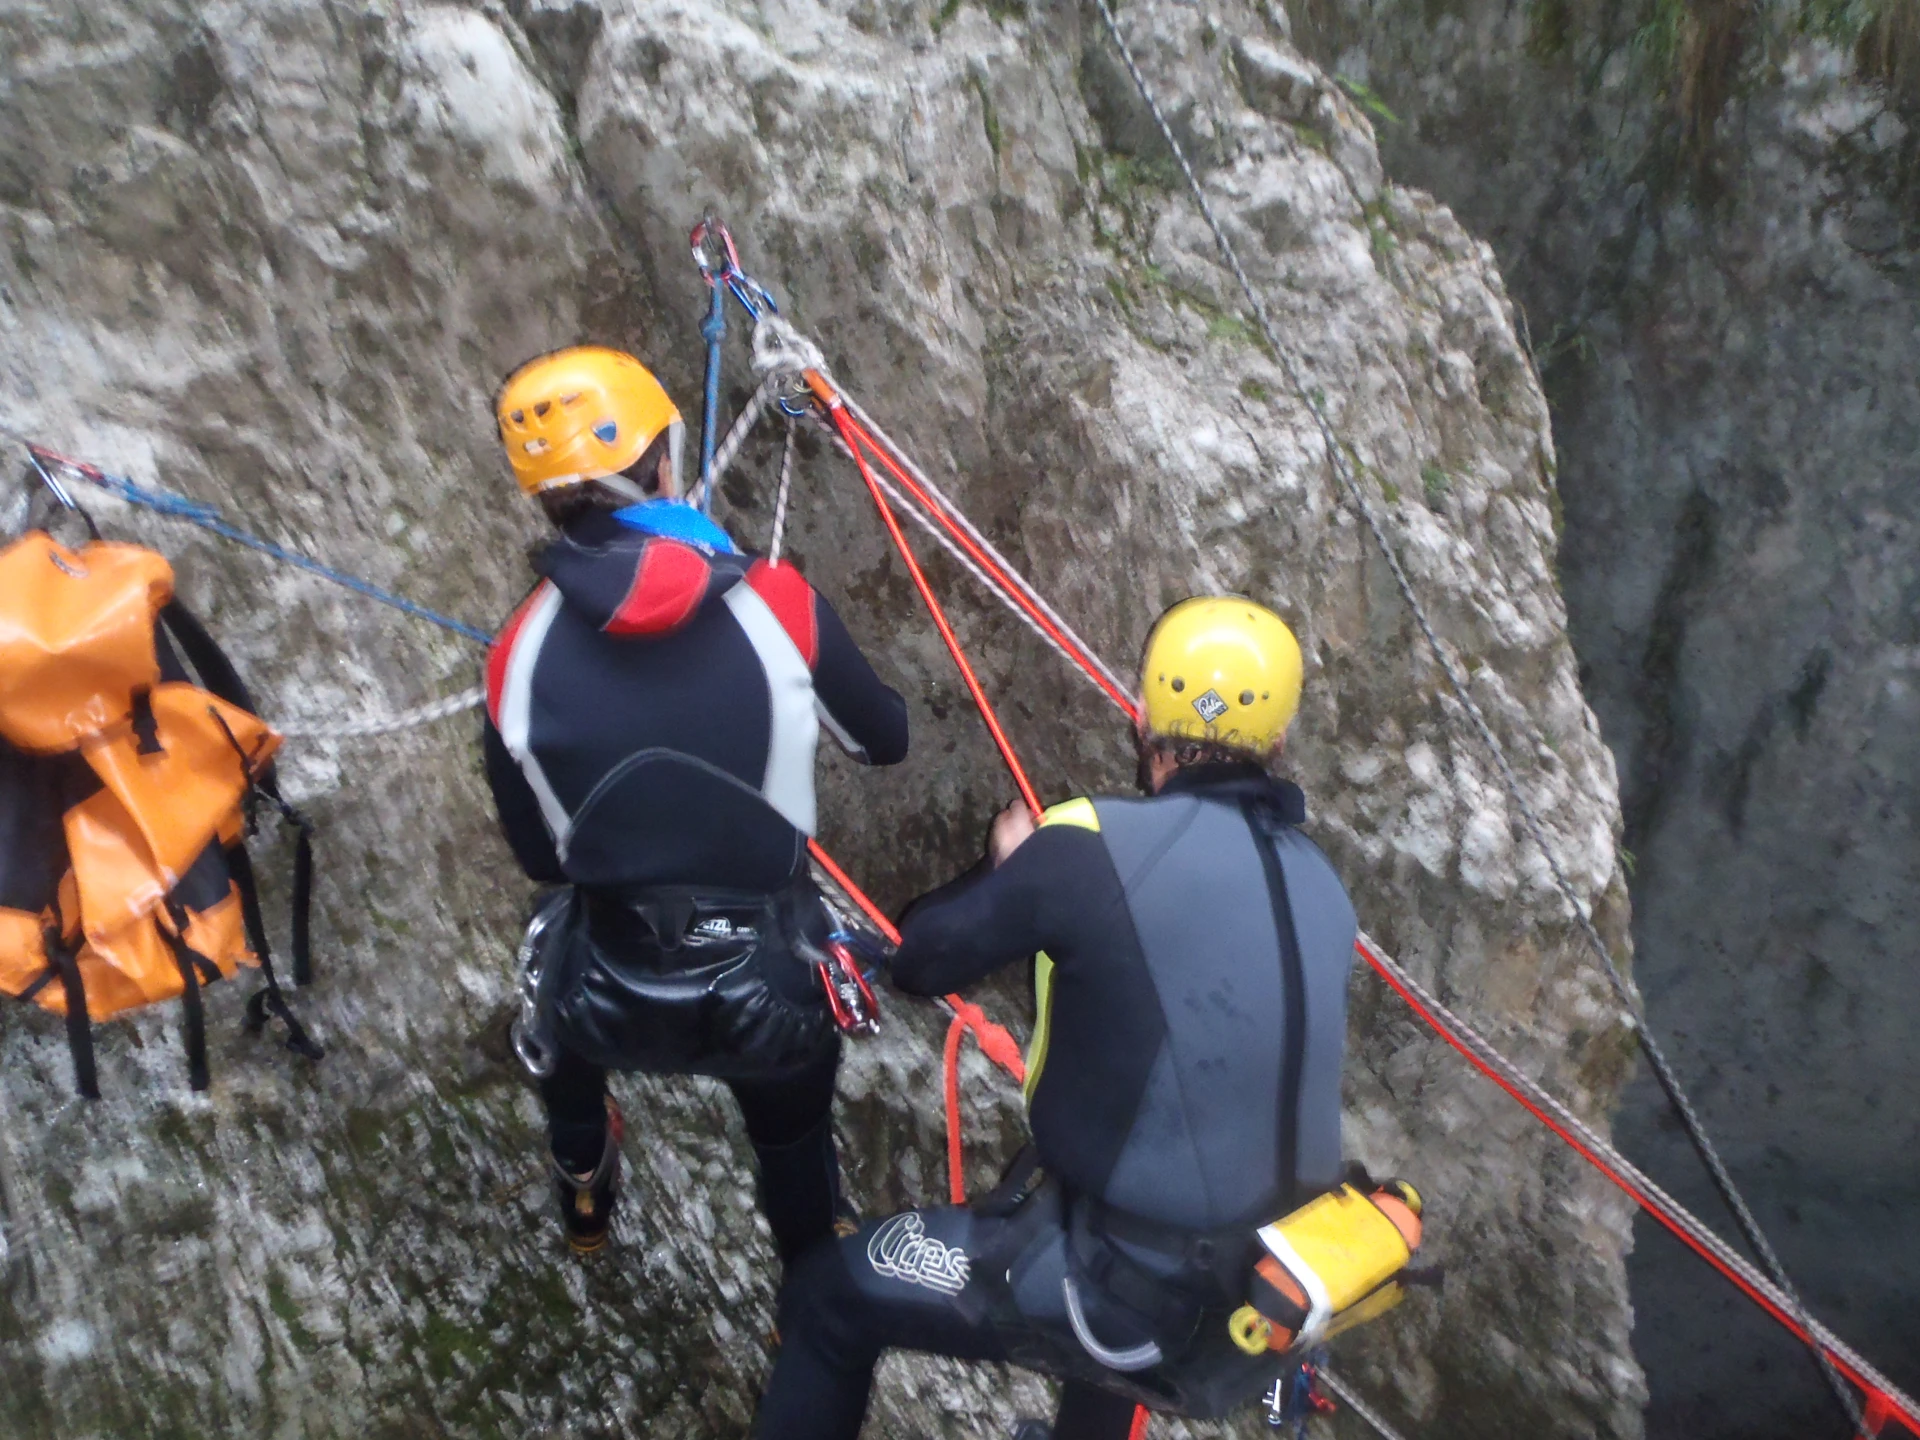 Canyoning course and safety in gorges